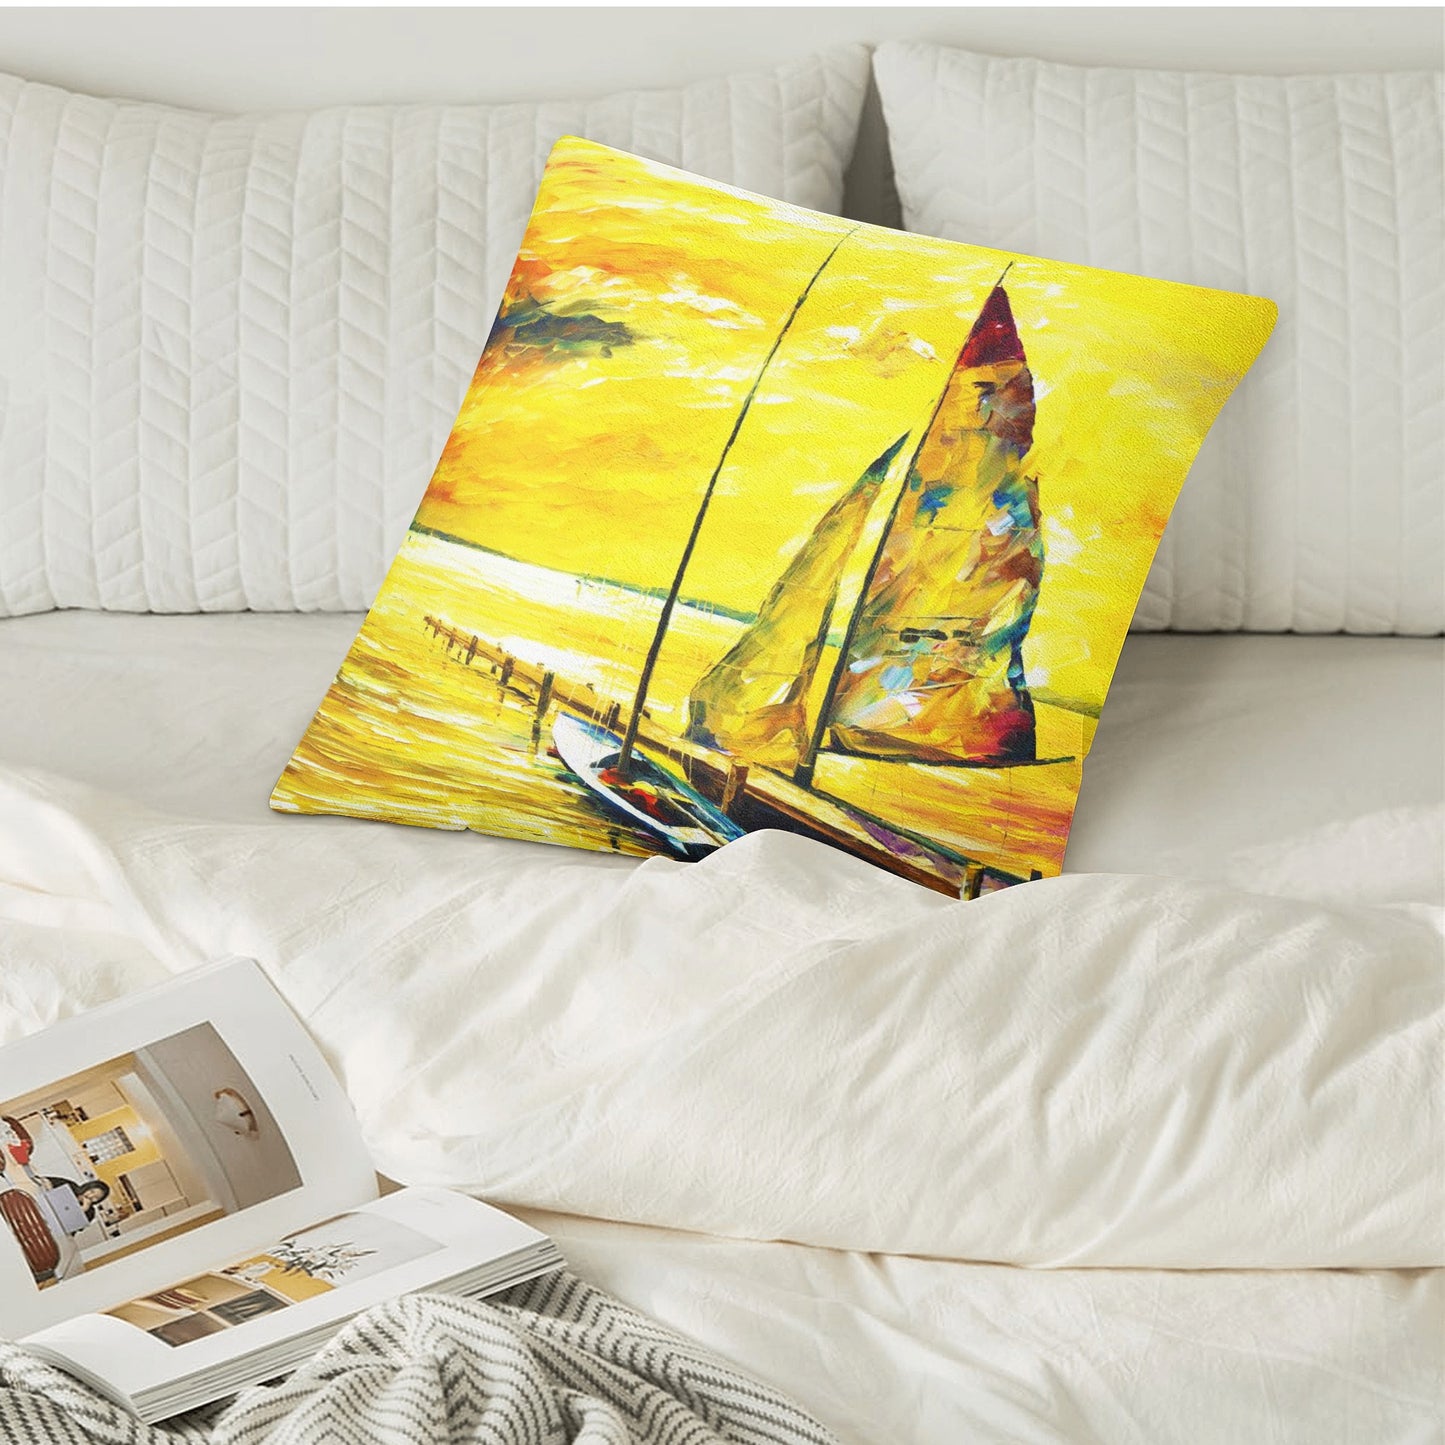 Double Side Printing Pillow Cover Afremov SAILING AWAY